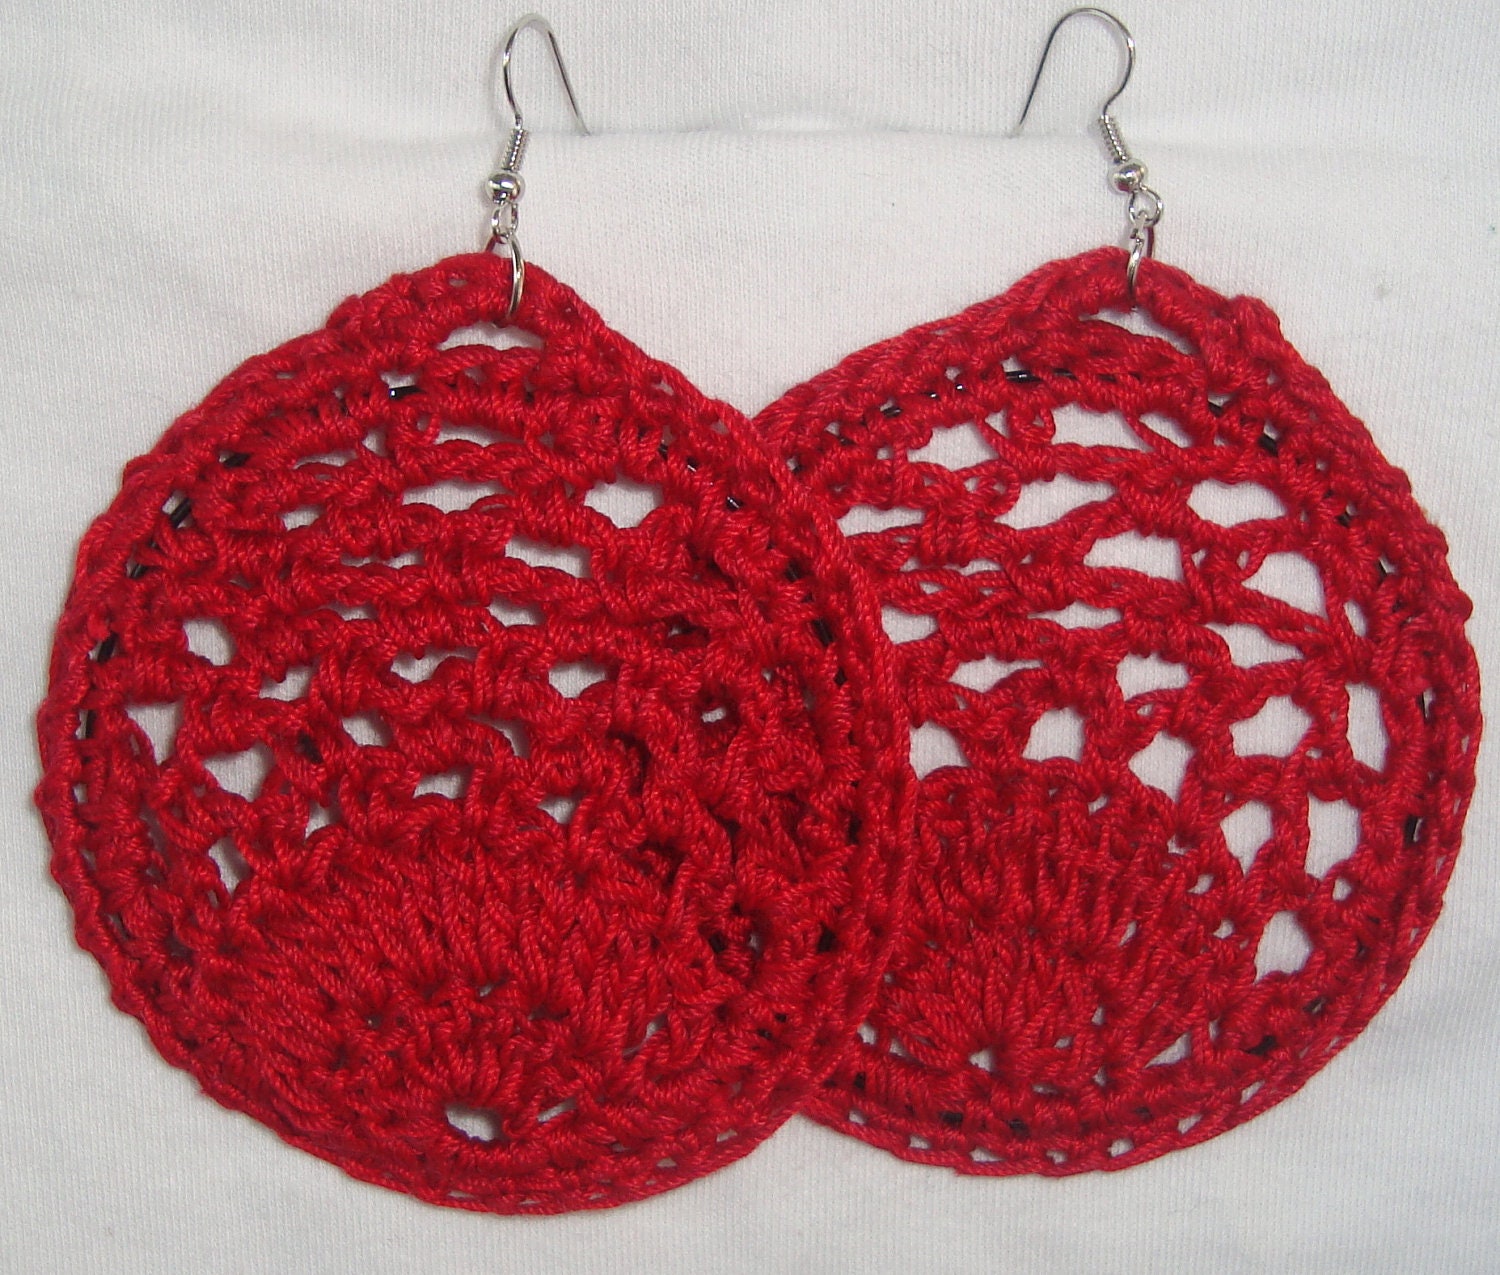 Crochet Earrings-2 Different Pairs 12.00 each